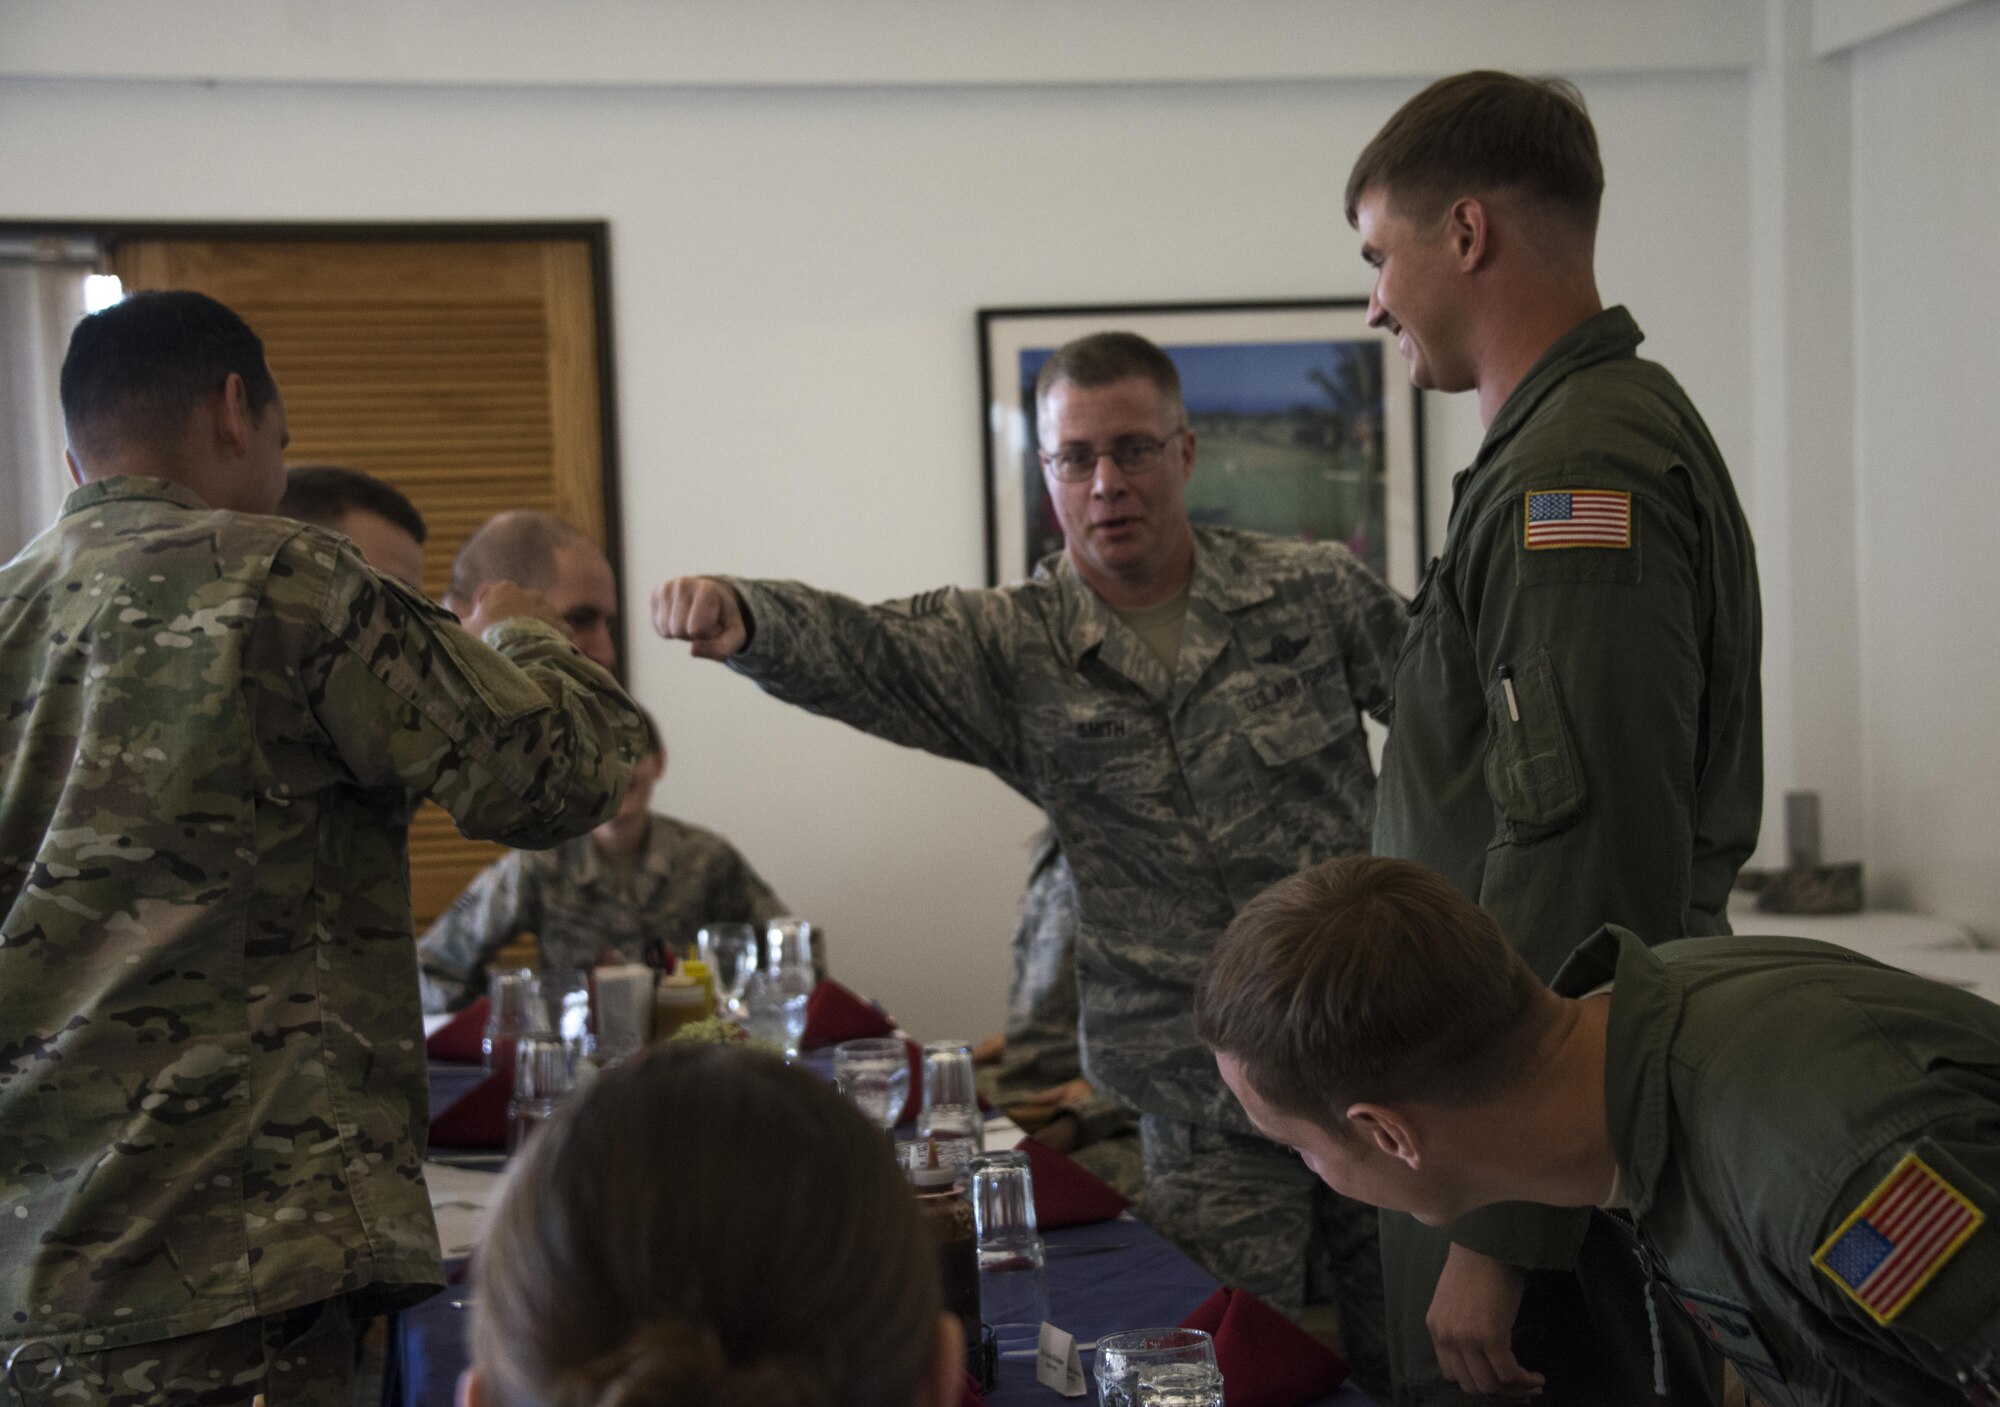 Air Force Special Operations Command Chief Master Sgt. Gregory Smith engages with members of the 353rd Special Operations Group during an Airmen luncheon, Nov. 7, 2016, at Kadena Air Base, Okinawa, Japan. As a part of his first Indo-Asia-Pacific tour since taking command, Webb took the time to meet with the Air Commandos and thank them for their service and sacrifice. (U.S. Air Force photo by Capt. Jessica Tait)